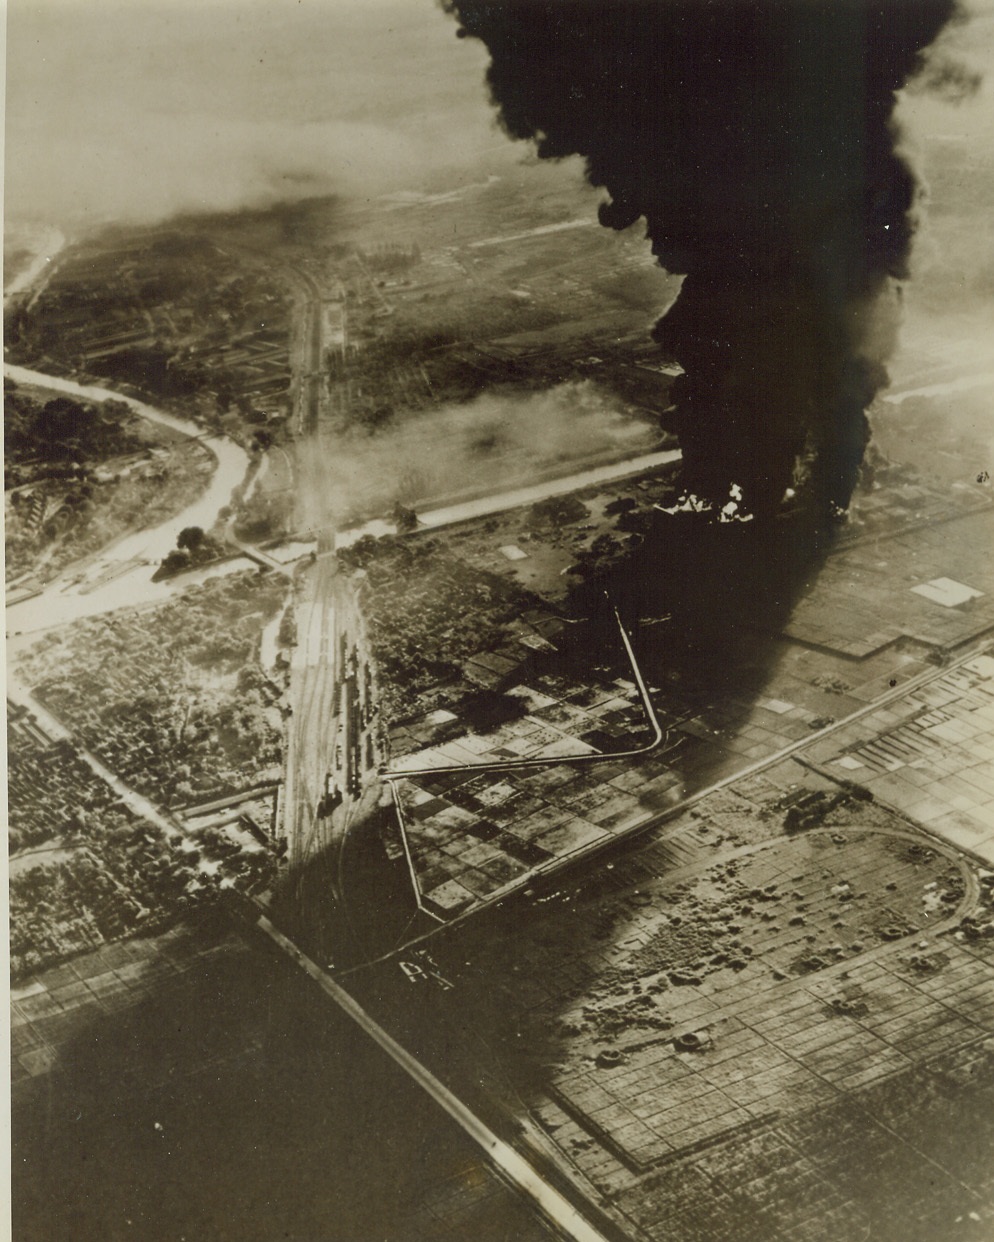 JAP FUEL BURNS AT SOERABAYA, 5/30/1944. SOERABAYA, JAVA – A huge shadow is cast across the country-side as jet black smoke rises from a fuel fire started by Allied raid and obscures the sun. This was part of the wide damage done to Jap installations at Soerabaya during recent large scale attack on that Jap-held city in Java, Netherlands Indies. Credit: Official U.S. Navy photo from ACME;